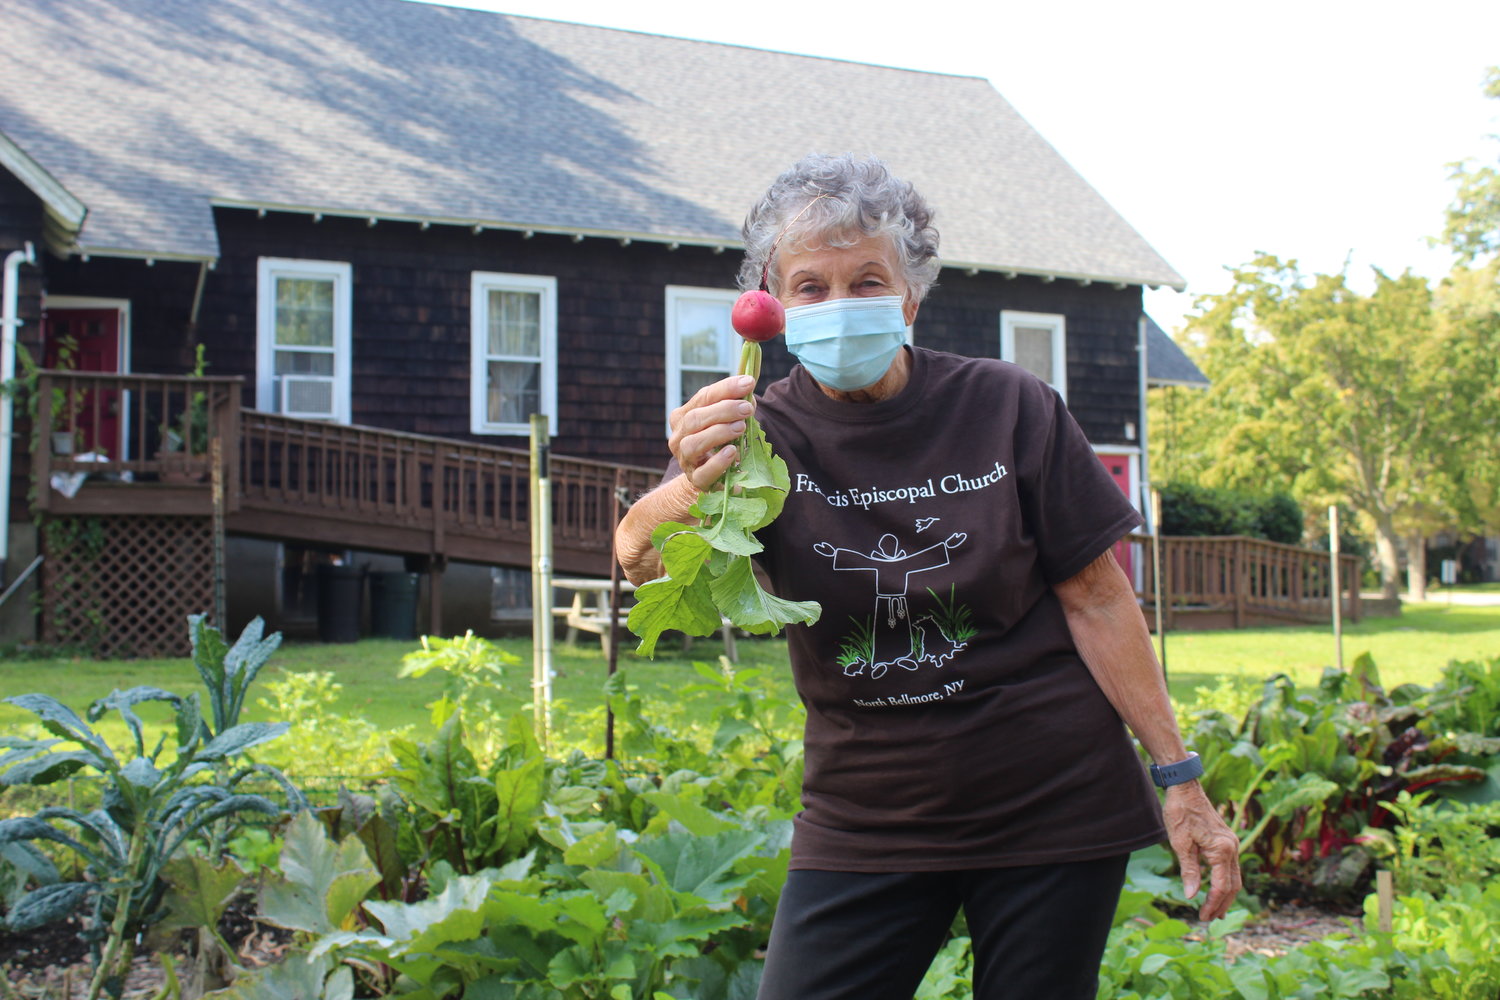 Camille Gaynor showed off a deep pink radish pulled fresh from the garden at St. Francis Episcopal Church in North Bellmore.